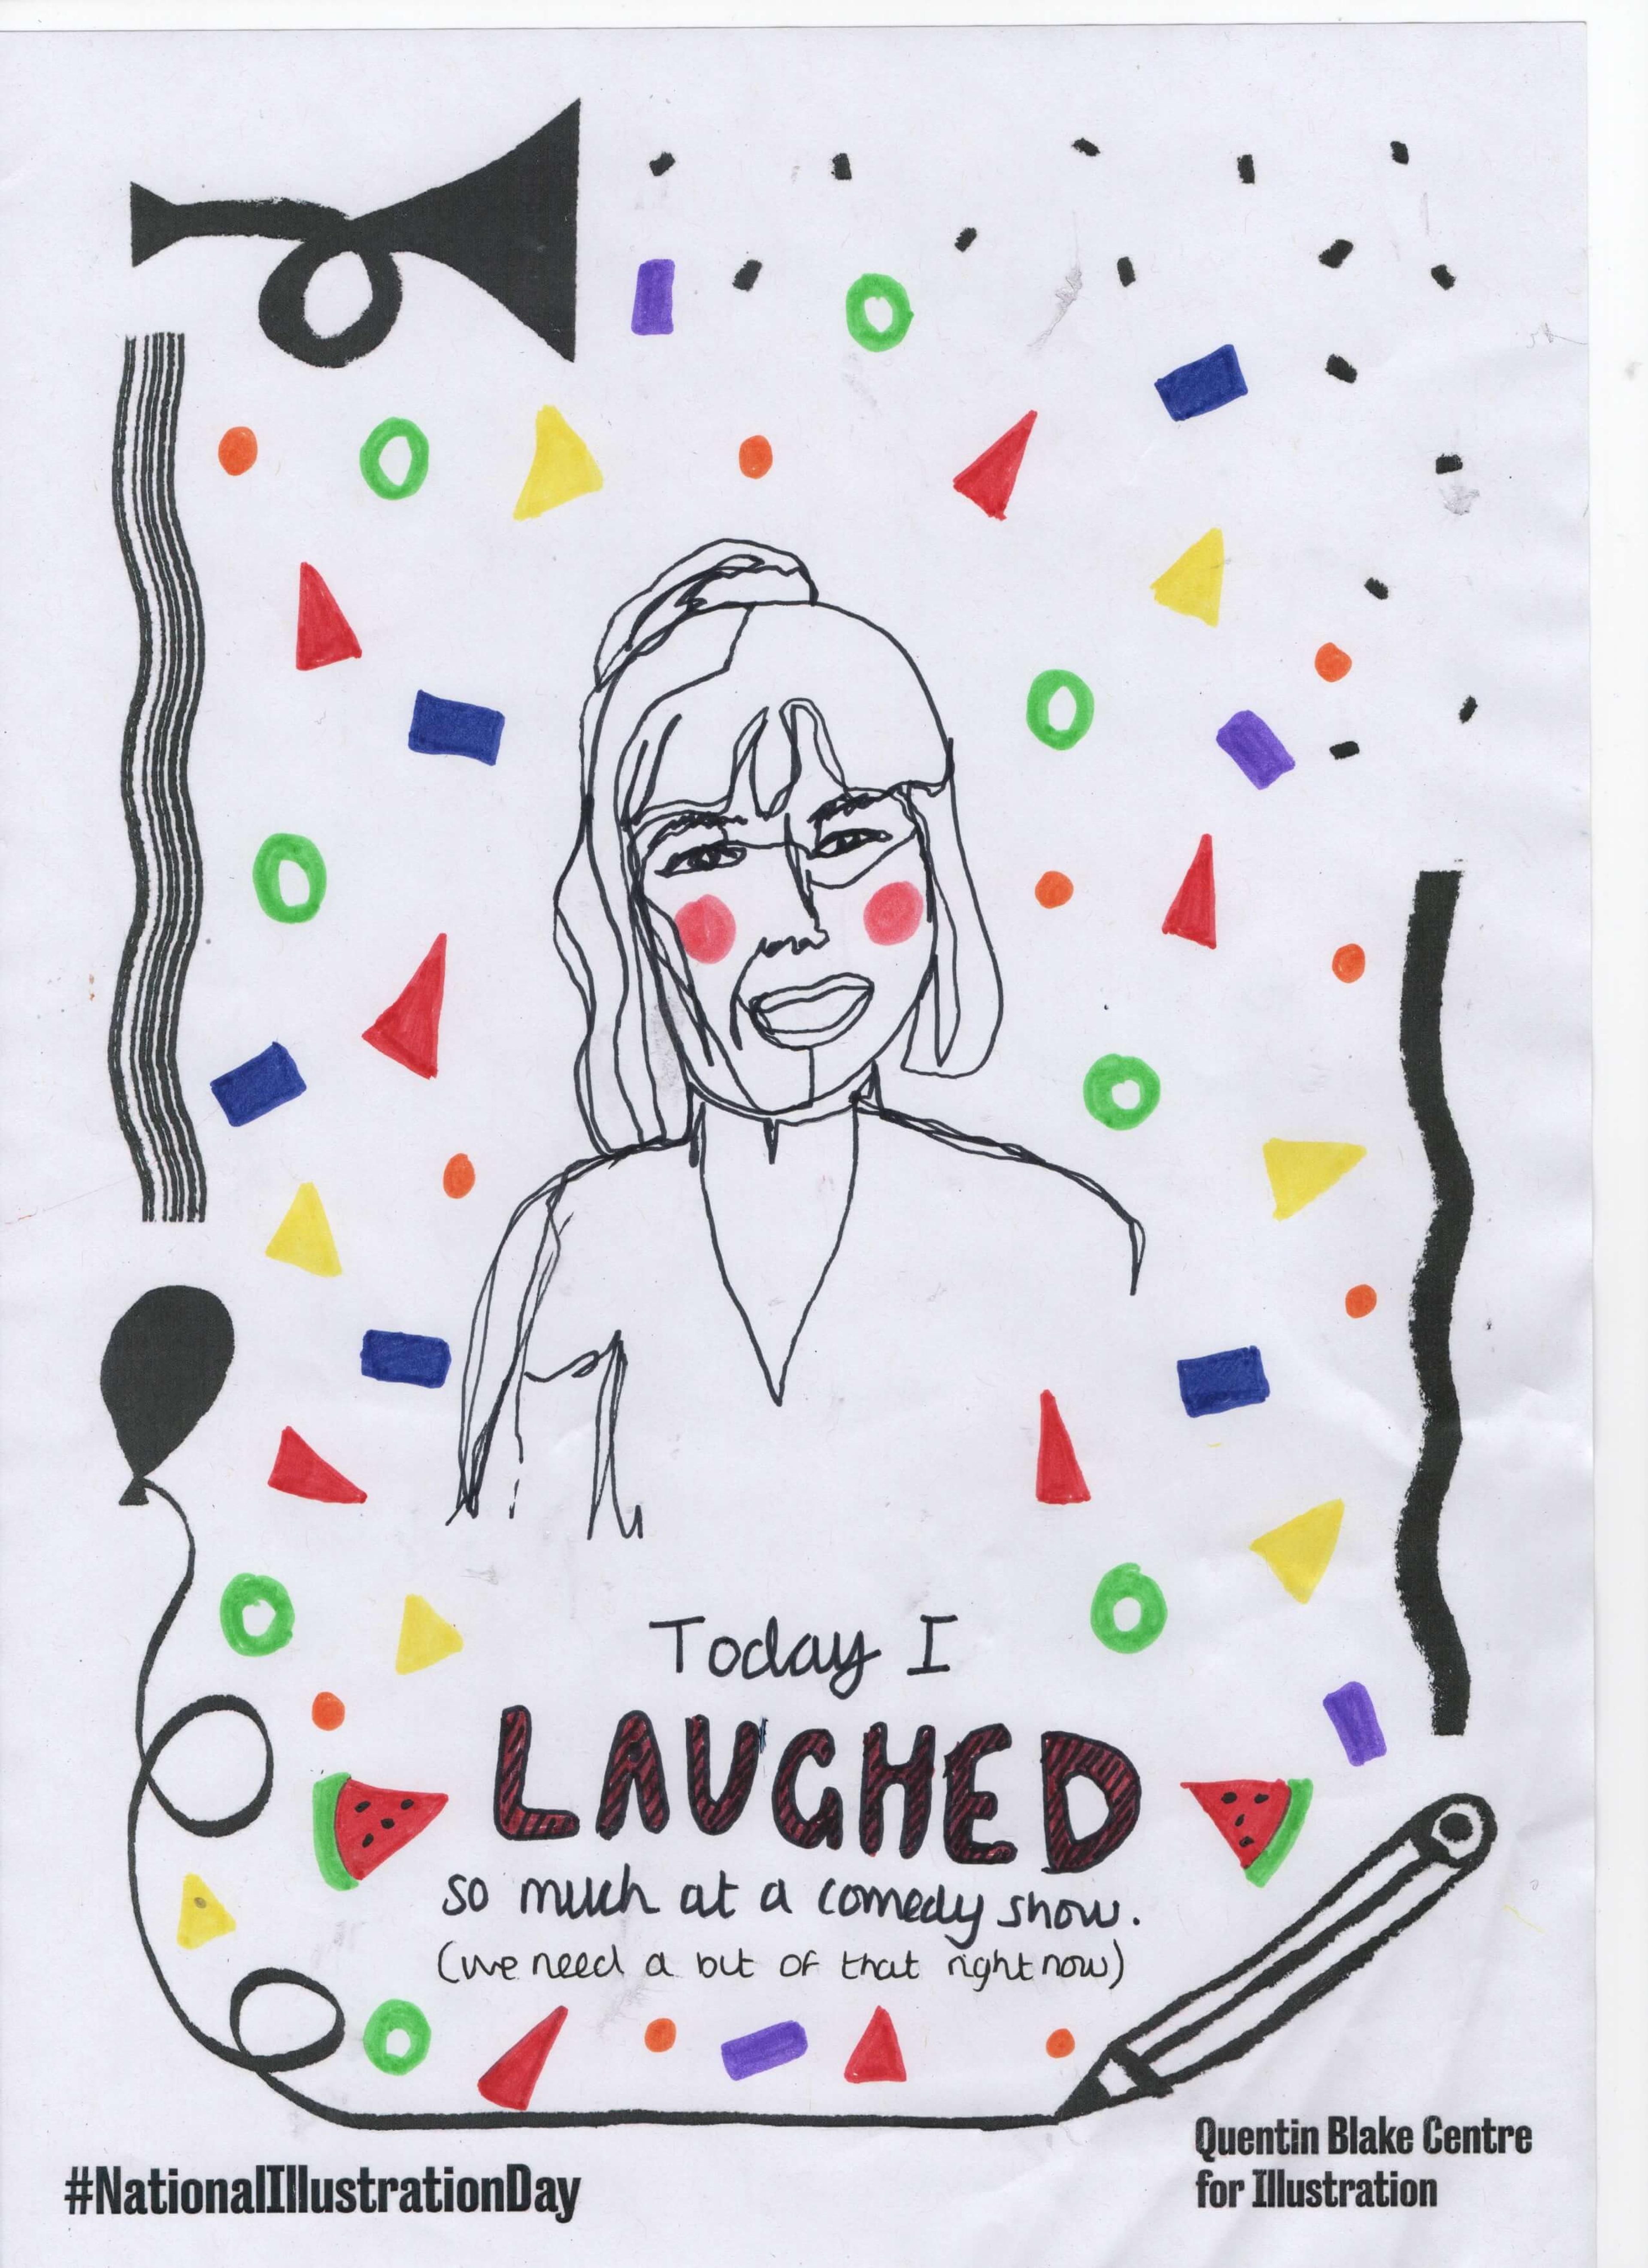 A laughing face made using a continuous line with little specks of falling confetti. Under the caption, there is a block of text that reads: "Today I laughed so much at a comedy show (we need a lot of that right now).